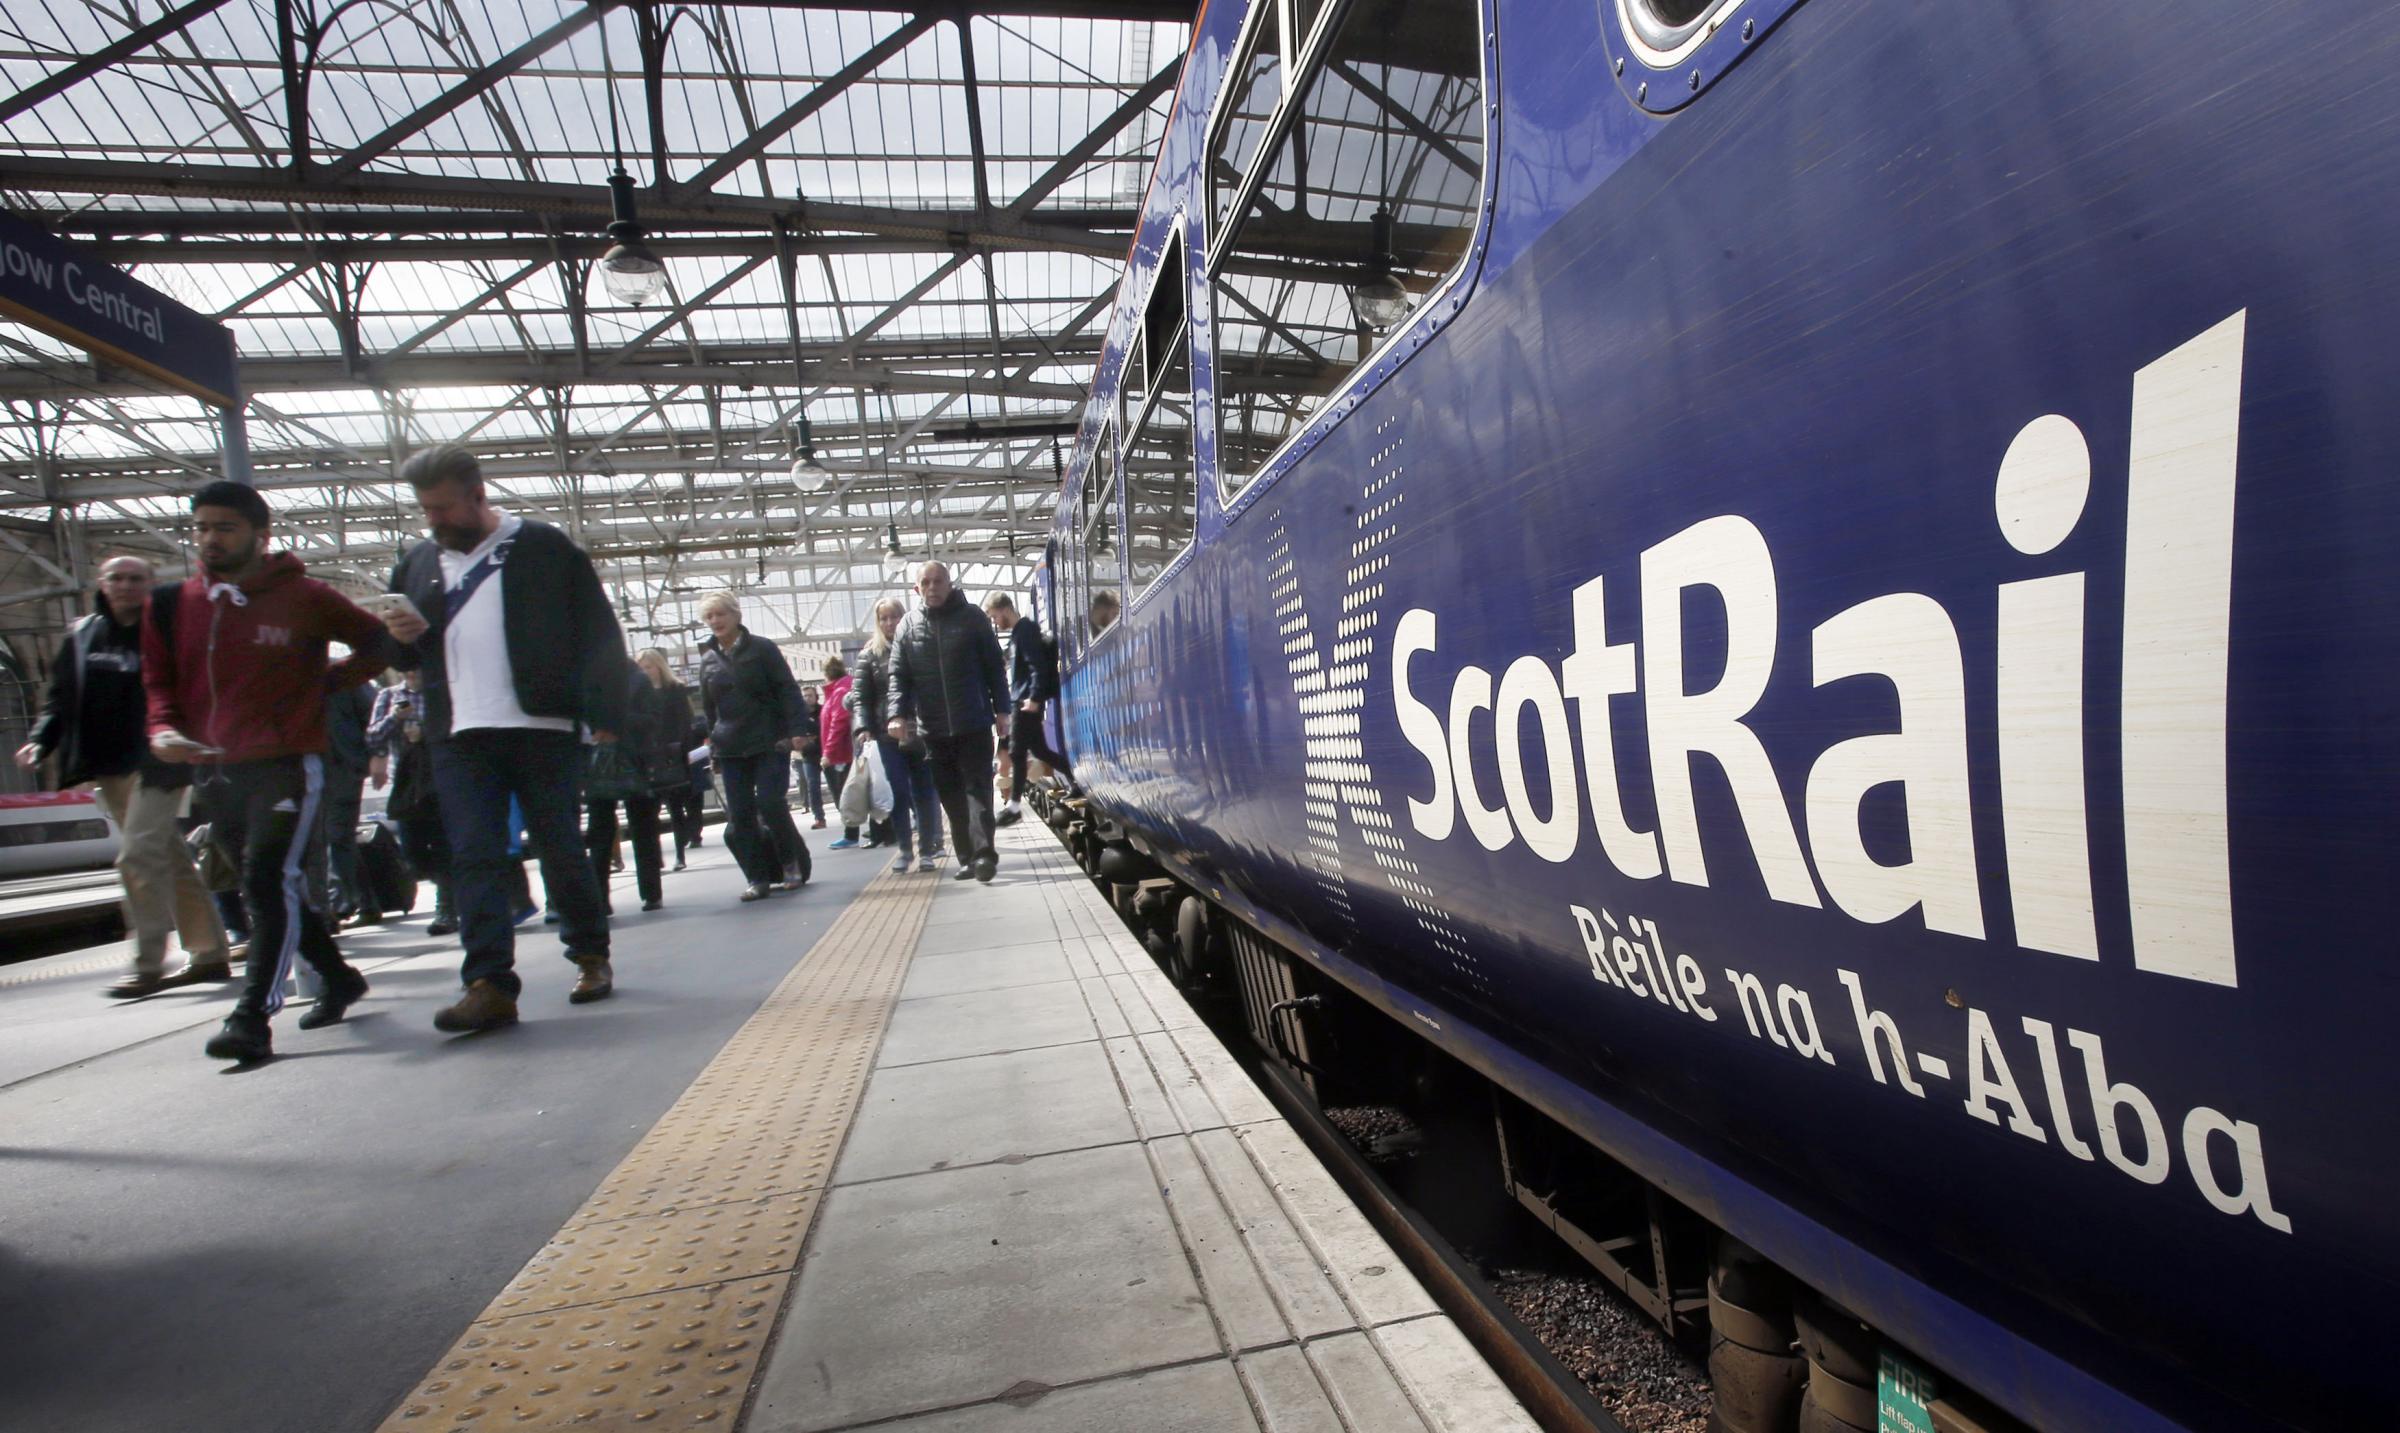 ScotRail announce improvement plan after performance target missed